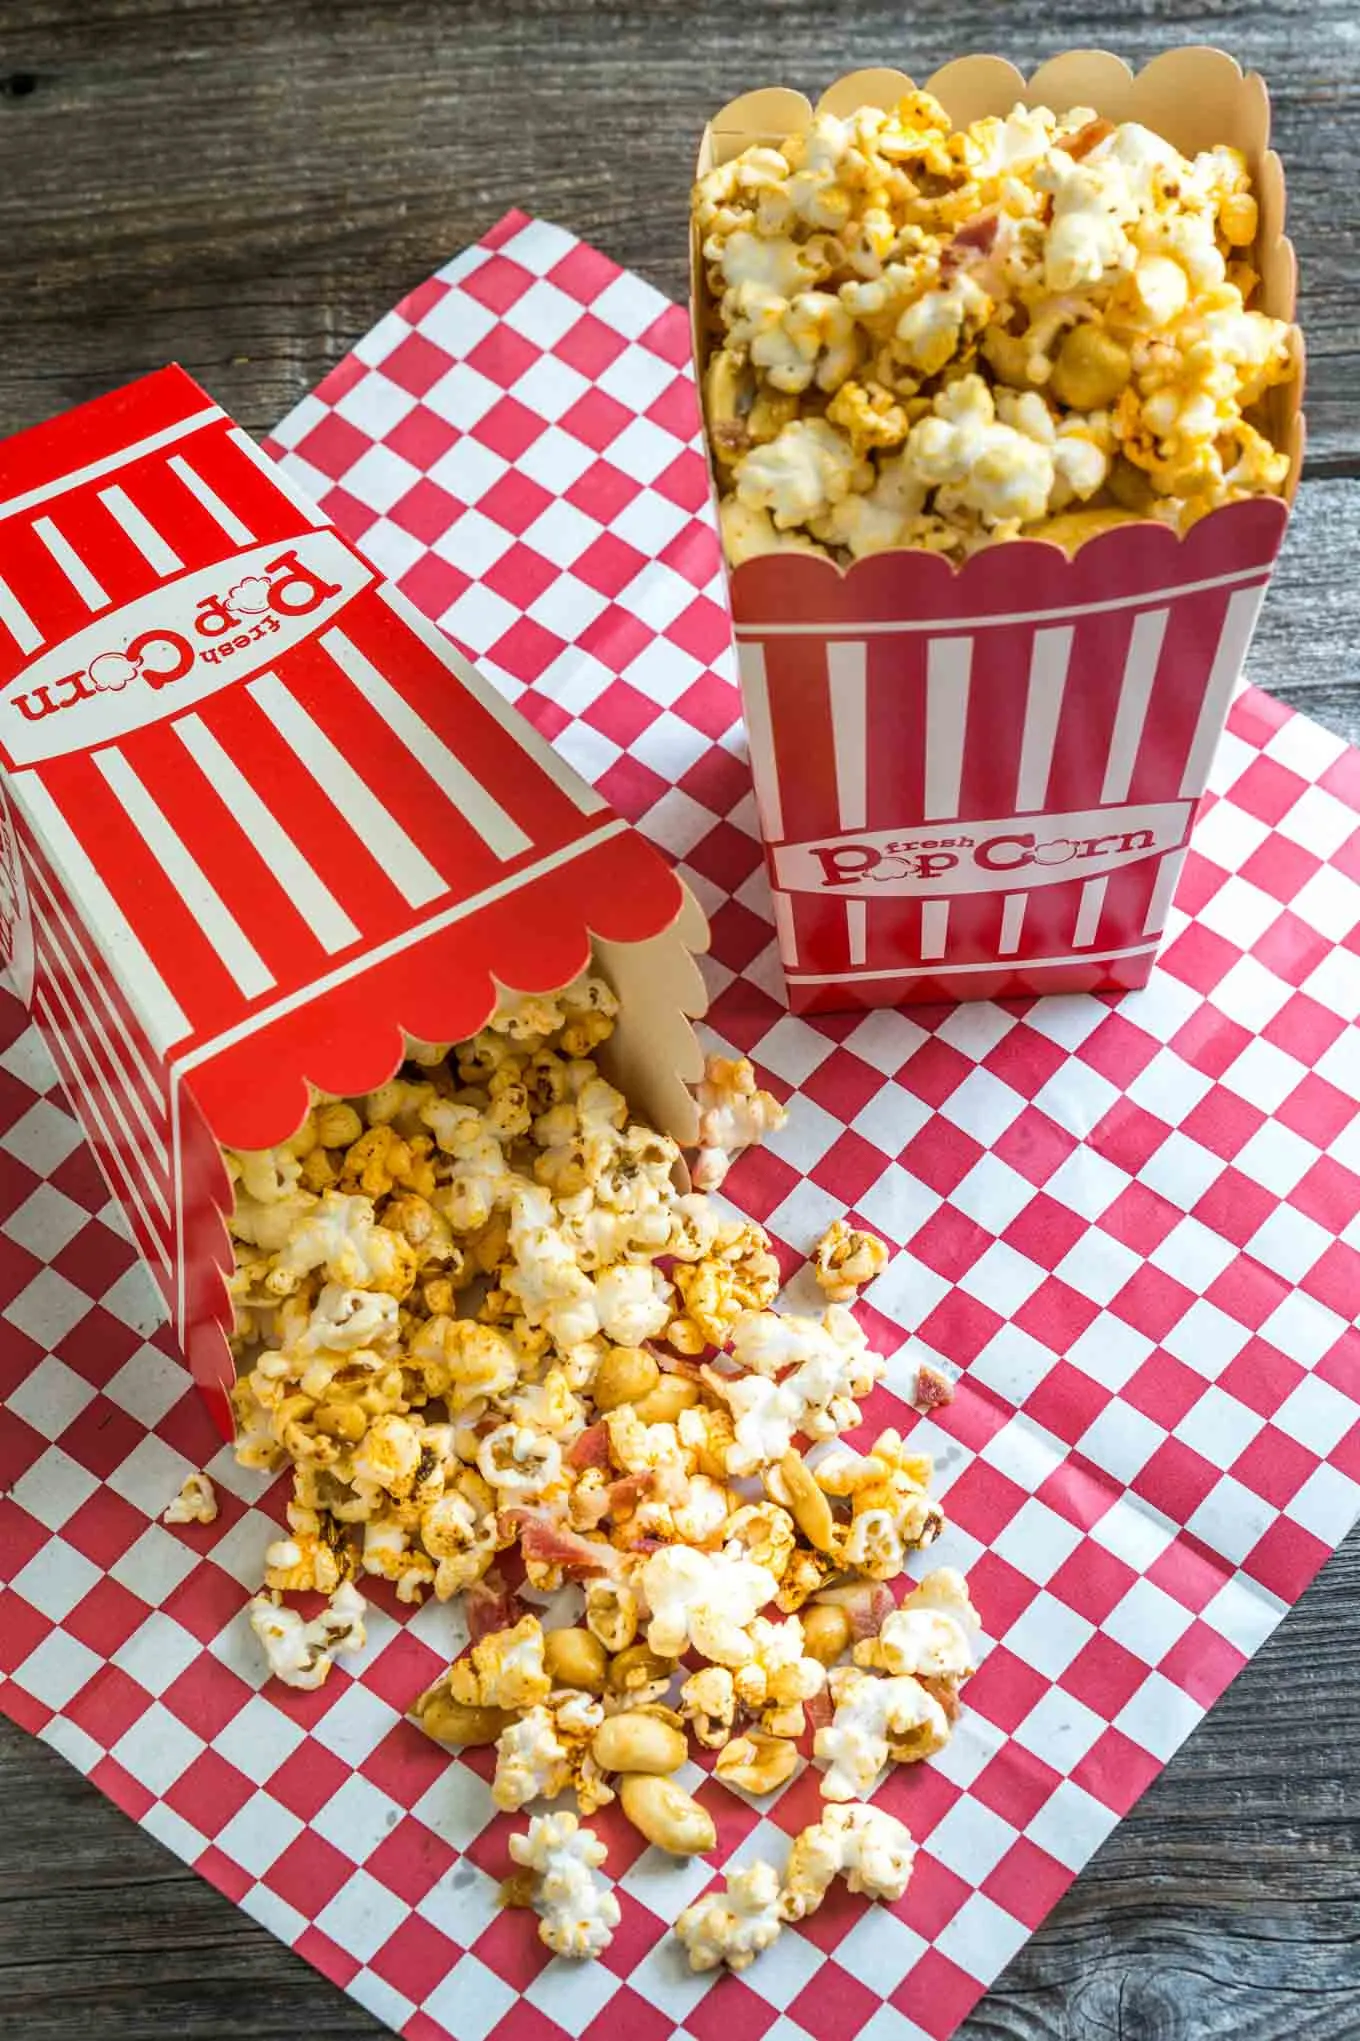 Red stripped popcorn boxes sitting on a red checked napkin. One box is upright and the other on its side with Honey nut popcorn with bacon spilling out.